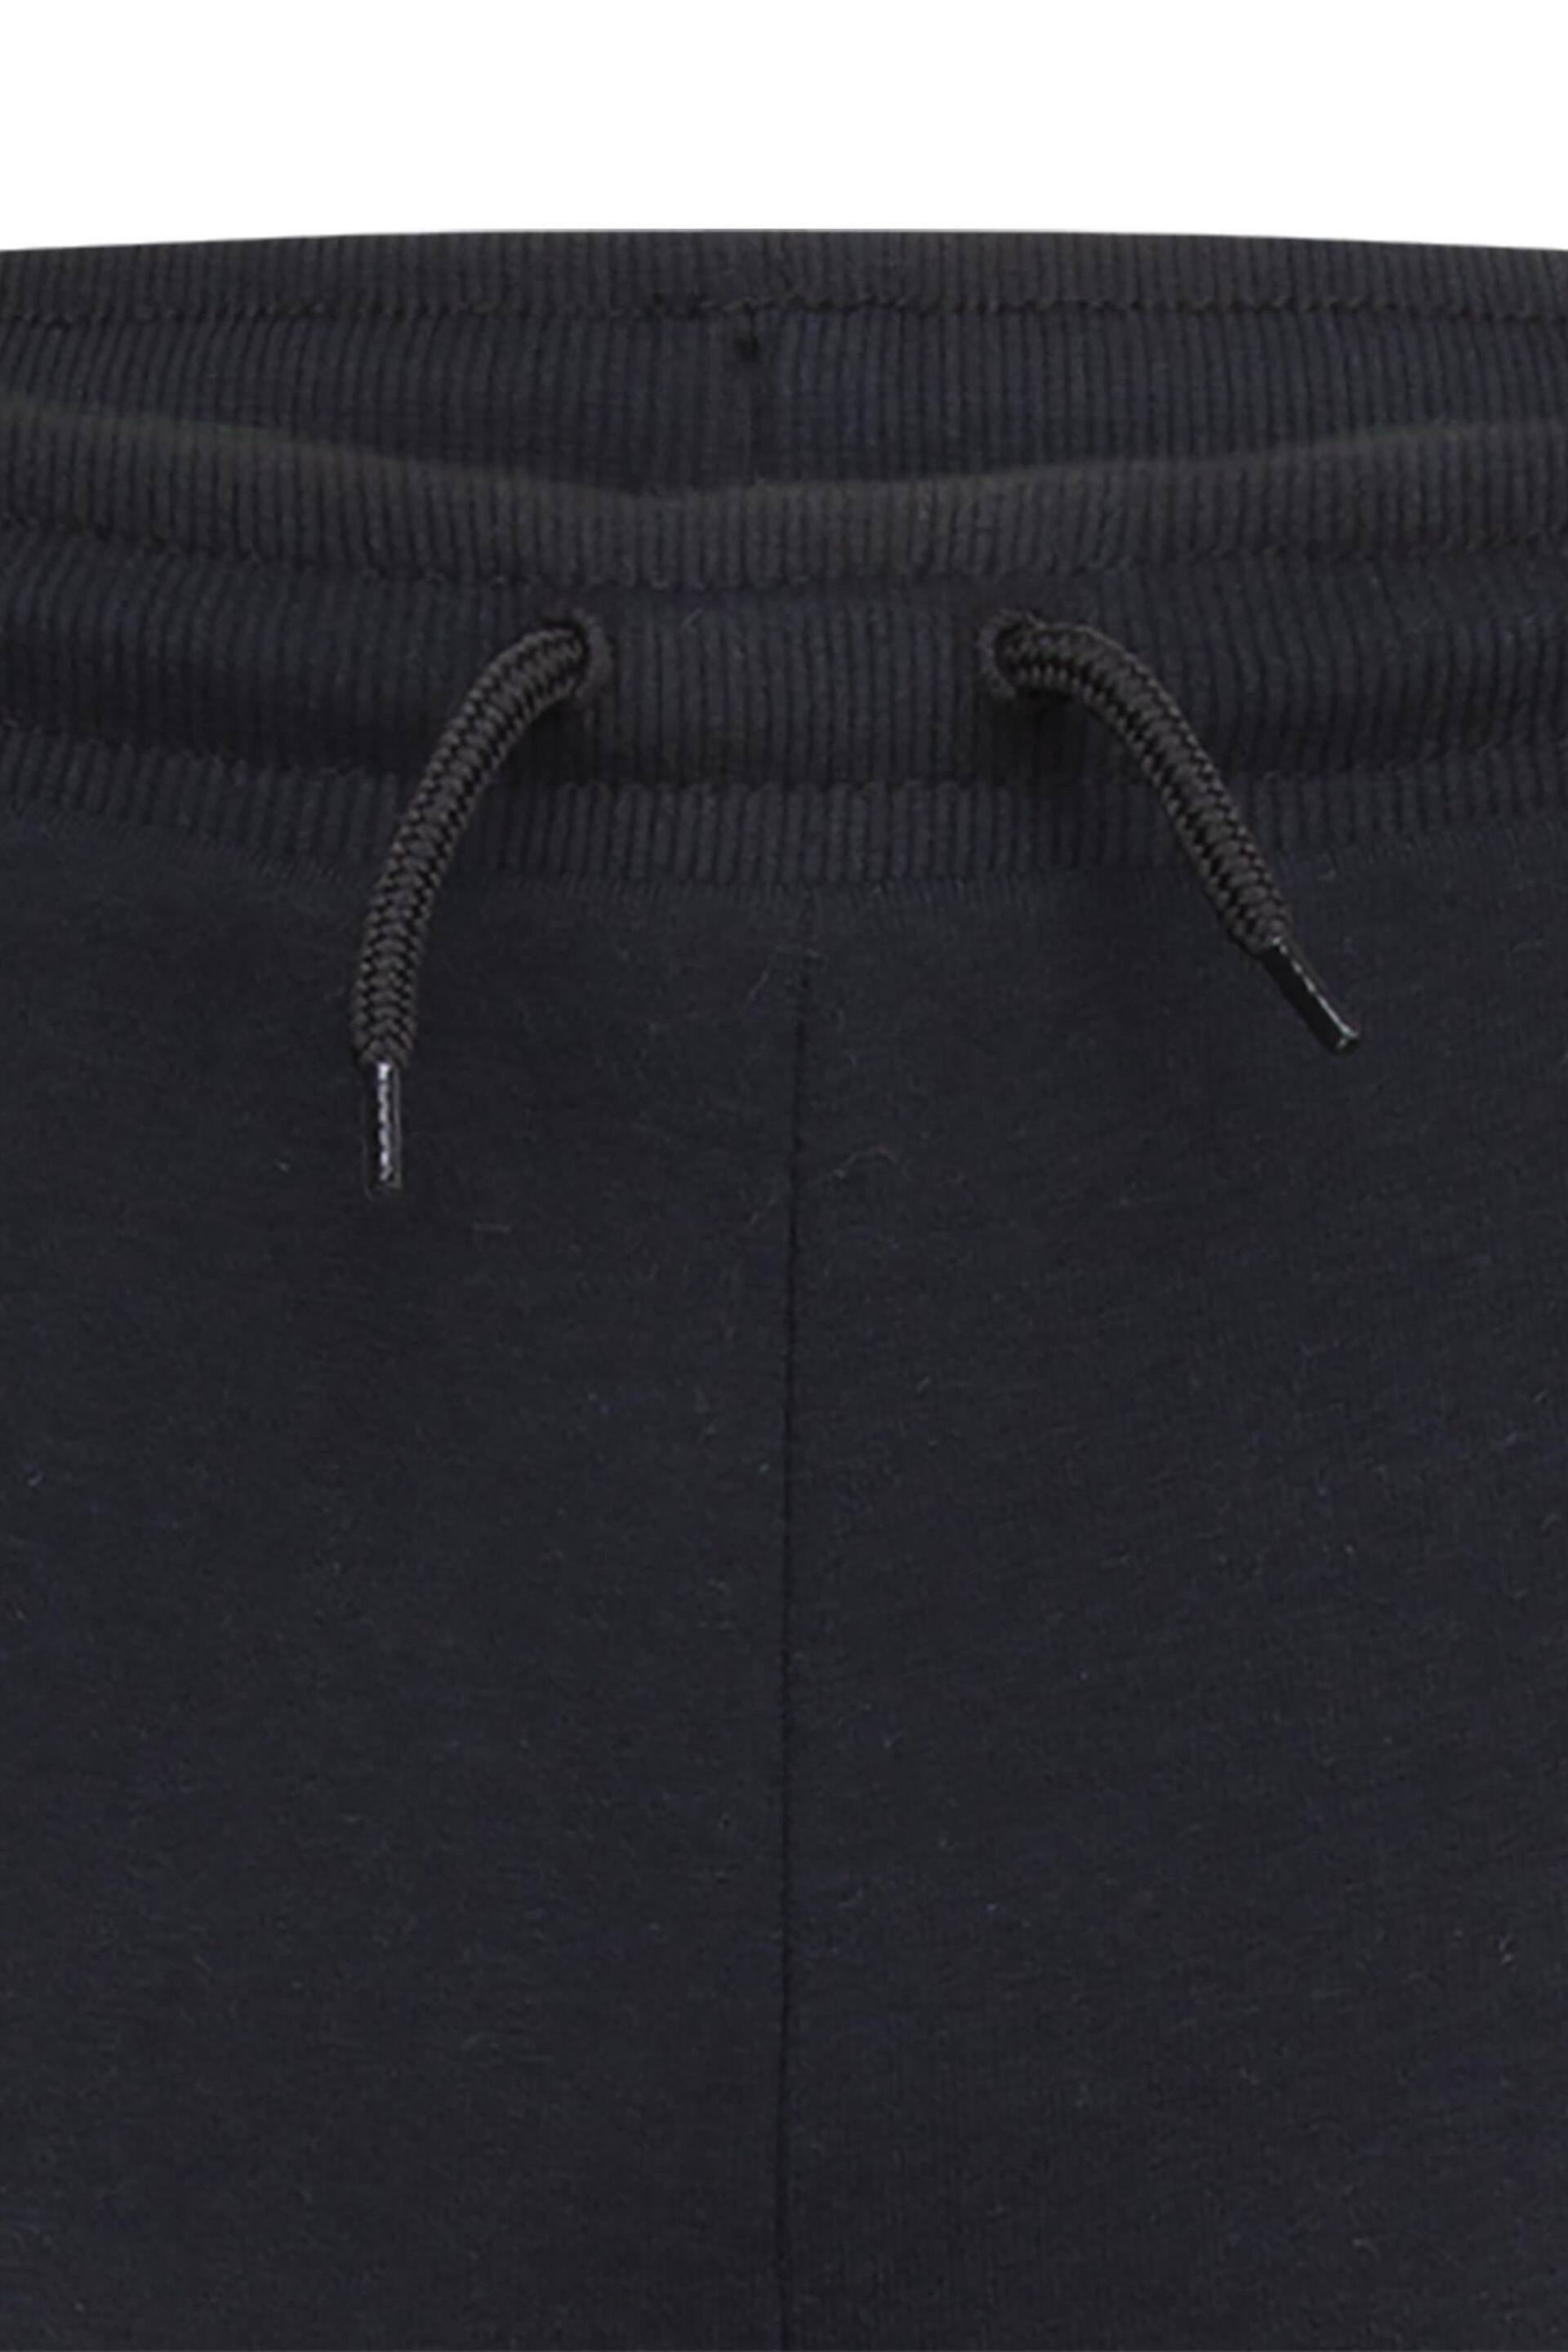 Converse Black Signature Chuck Patch Joggers - Image 5 of 6